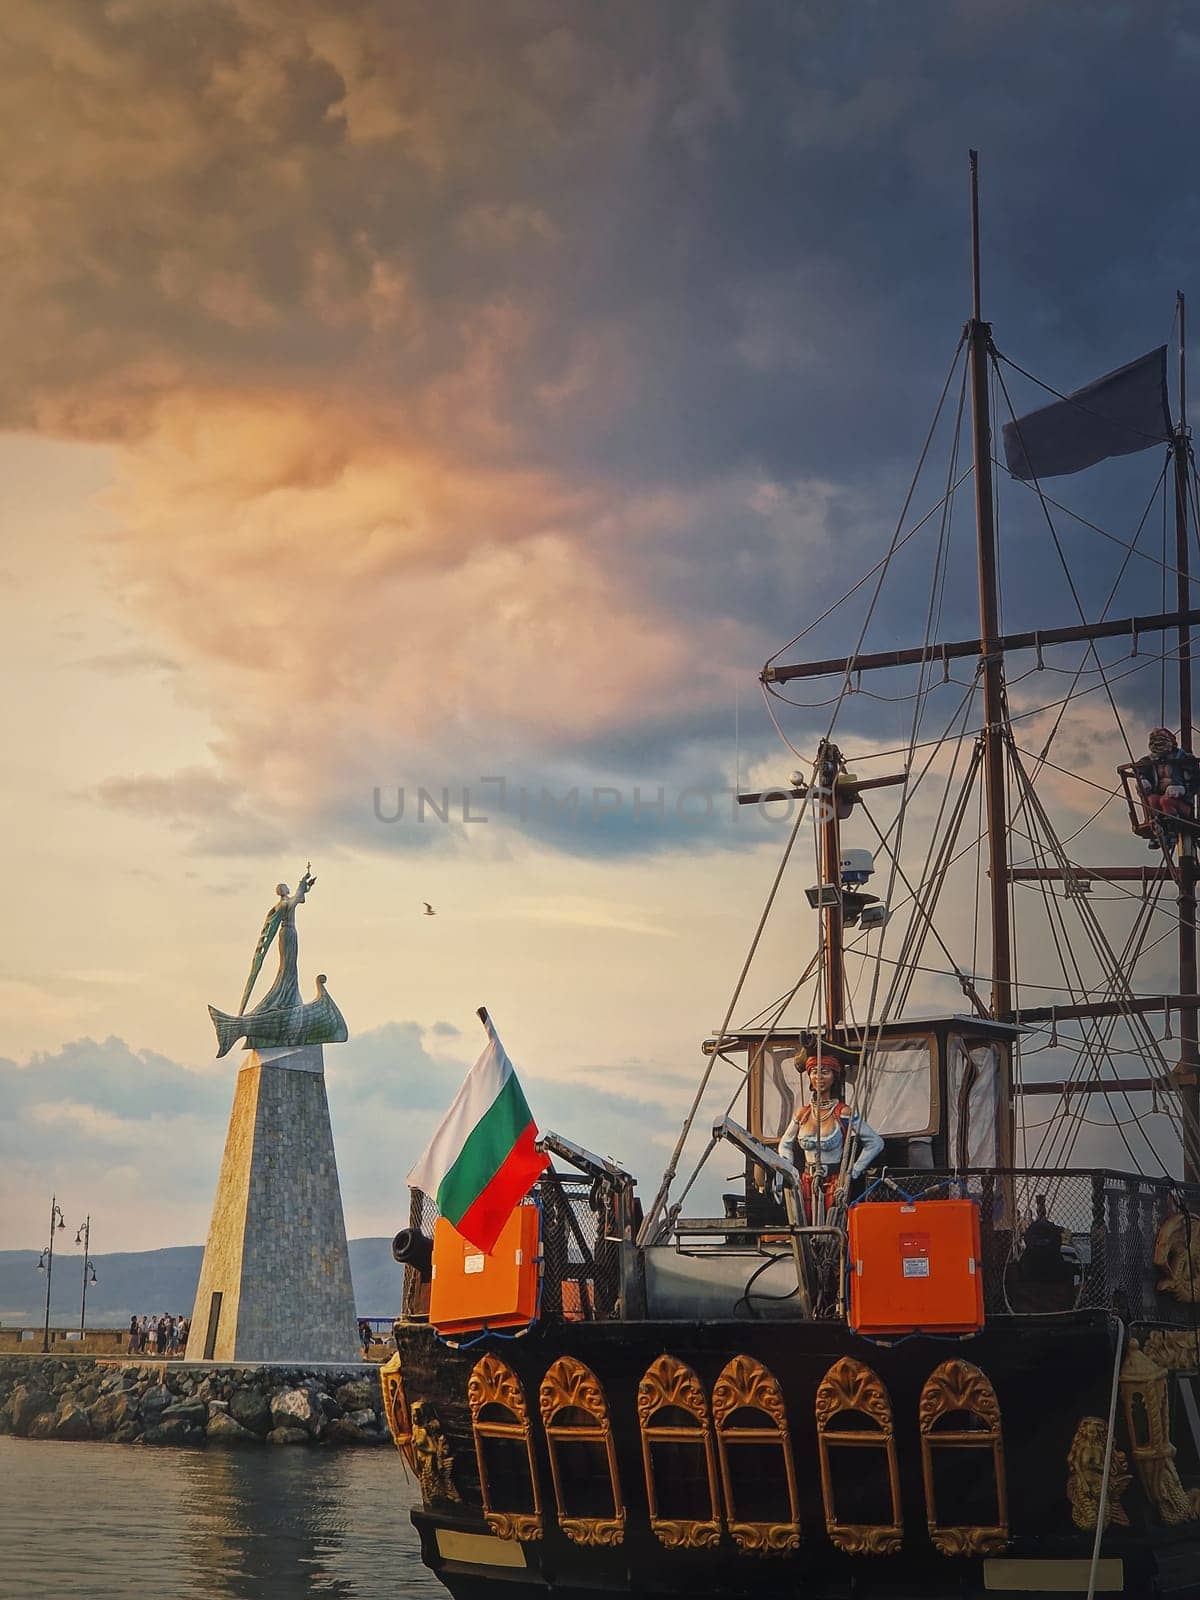 Statue of Saint Nicholas the patron of sailors, in the old town of Nessebar, Burgas, Bulgaria. Sunset scene at the coastline with a sail ship moored at the deck by psychoshadow